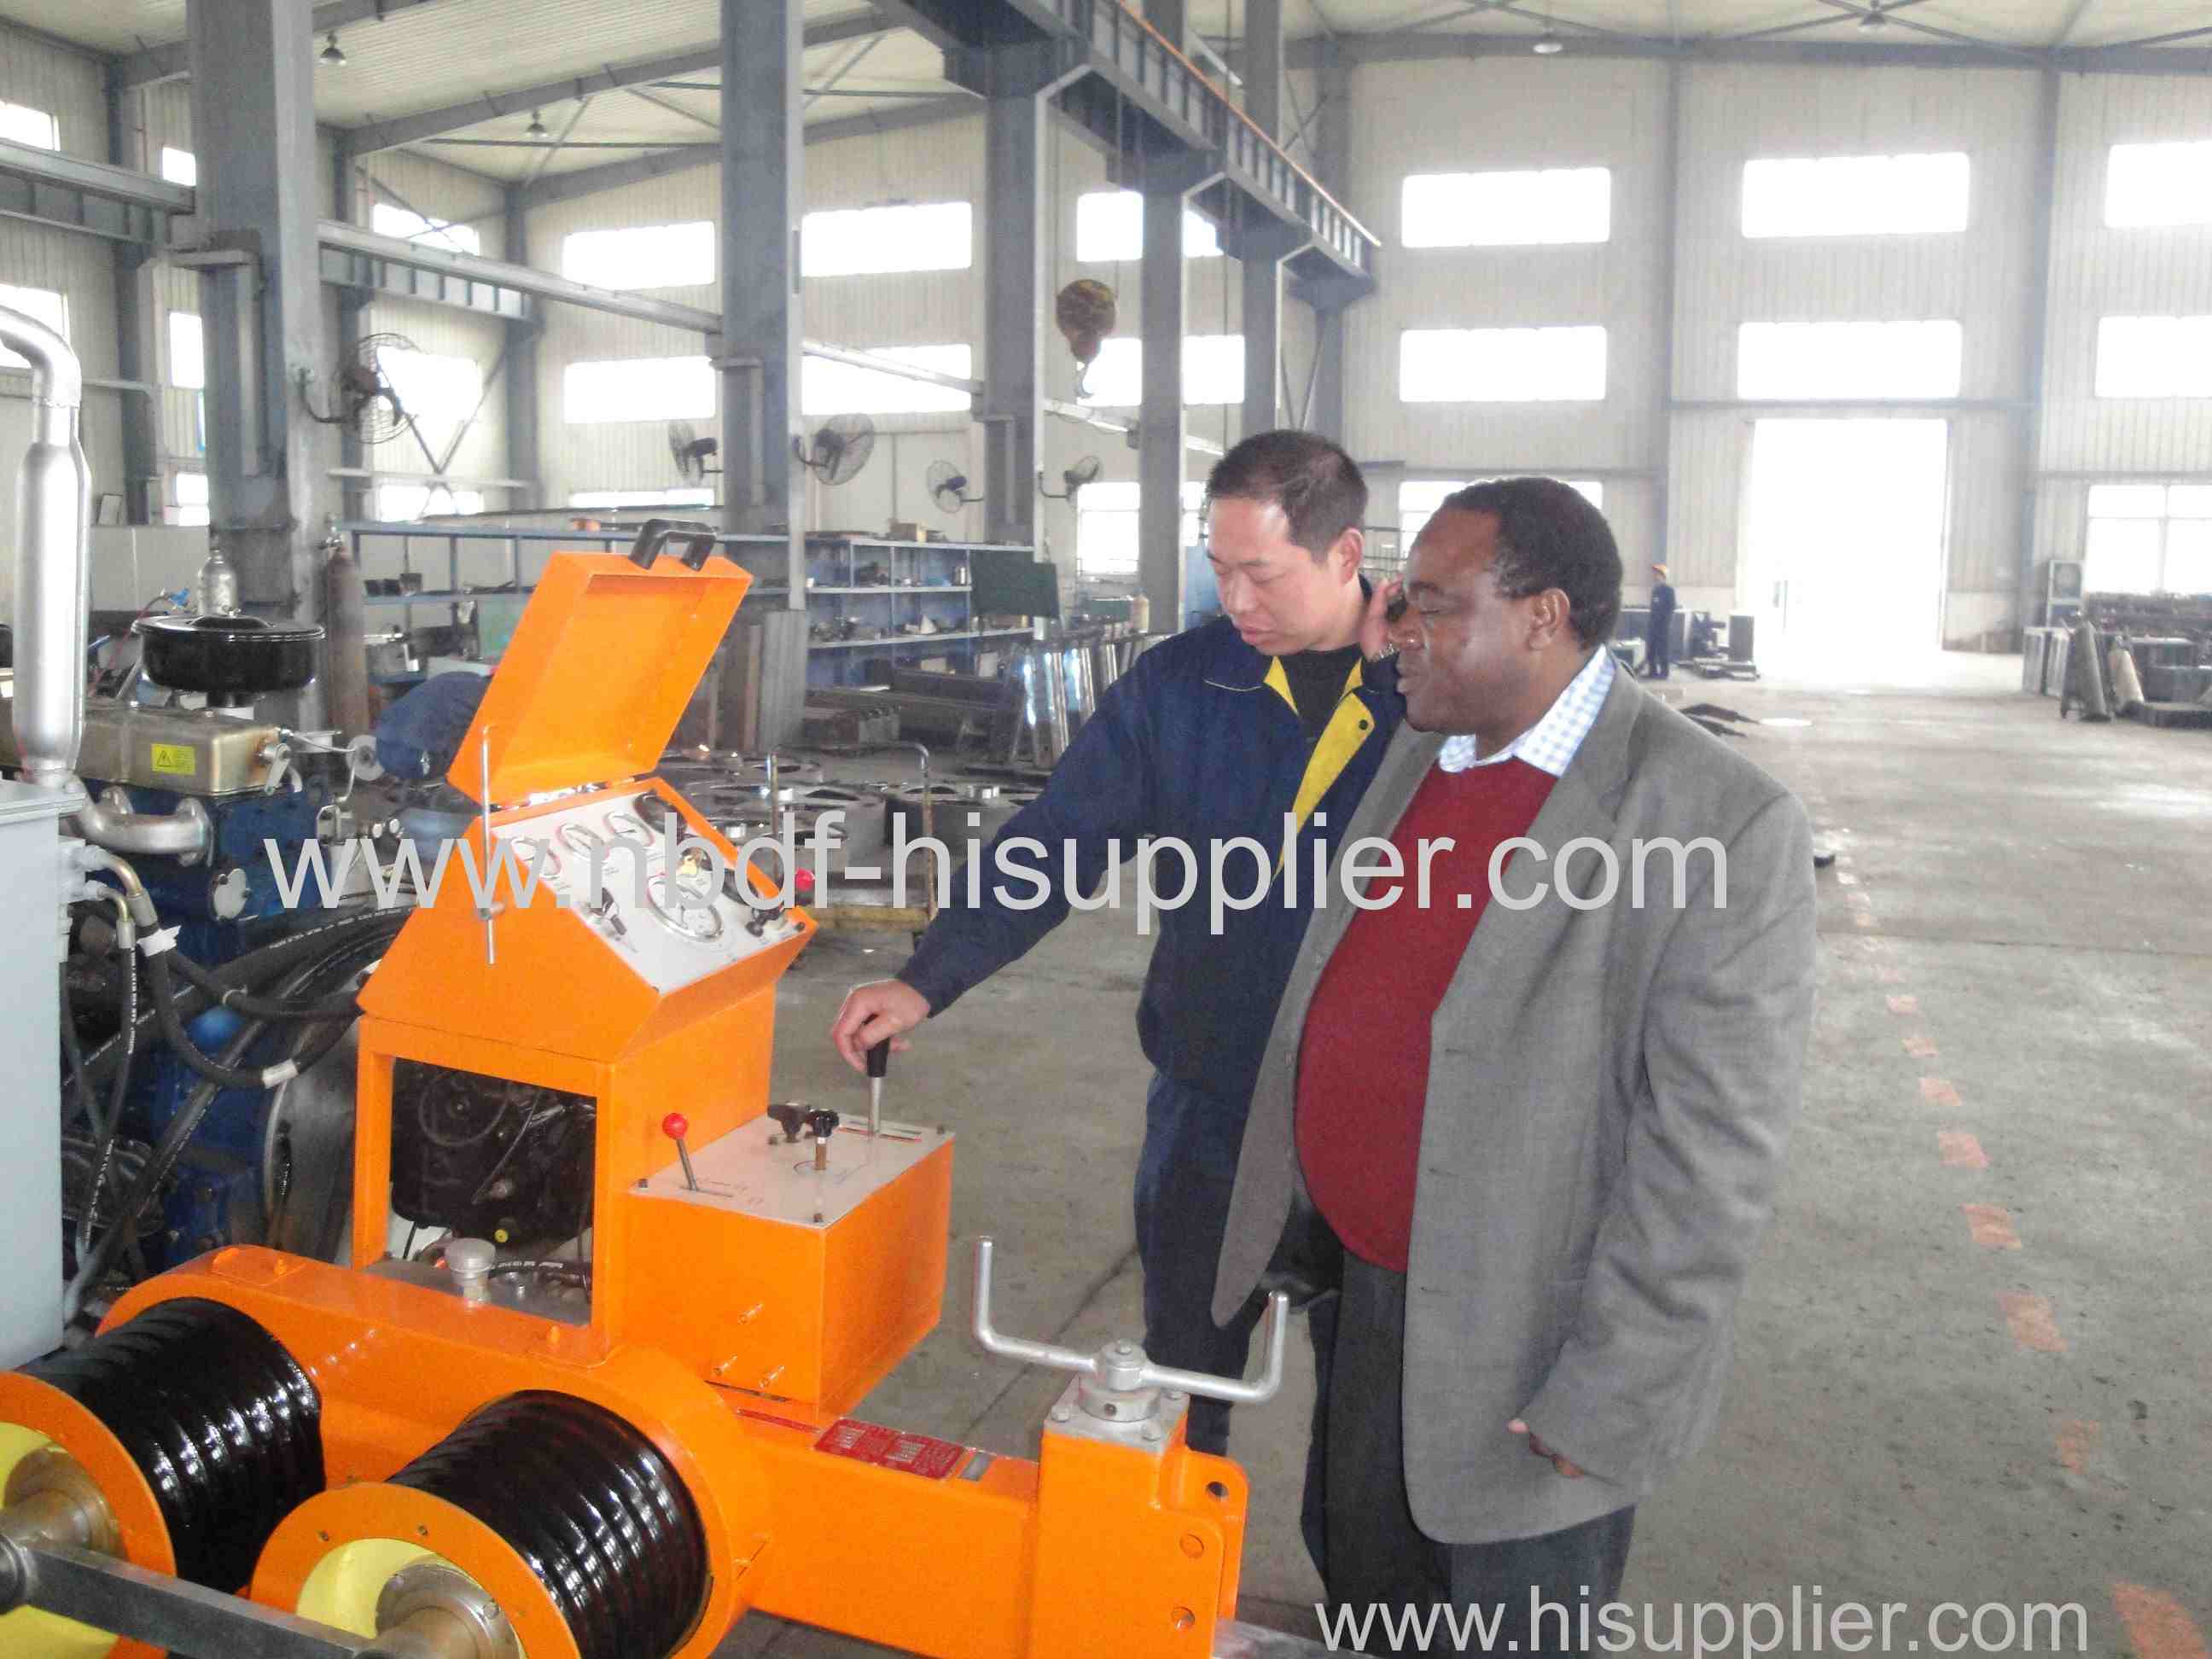 Customer from South africa visited our factory and dispatch the equipment